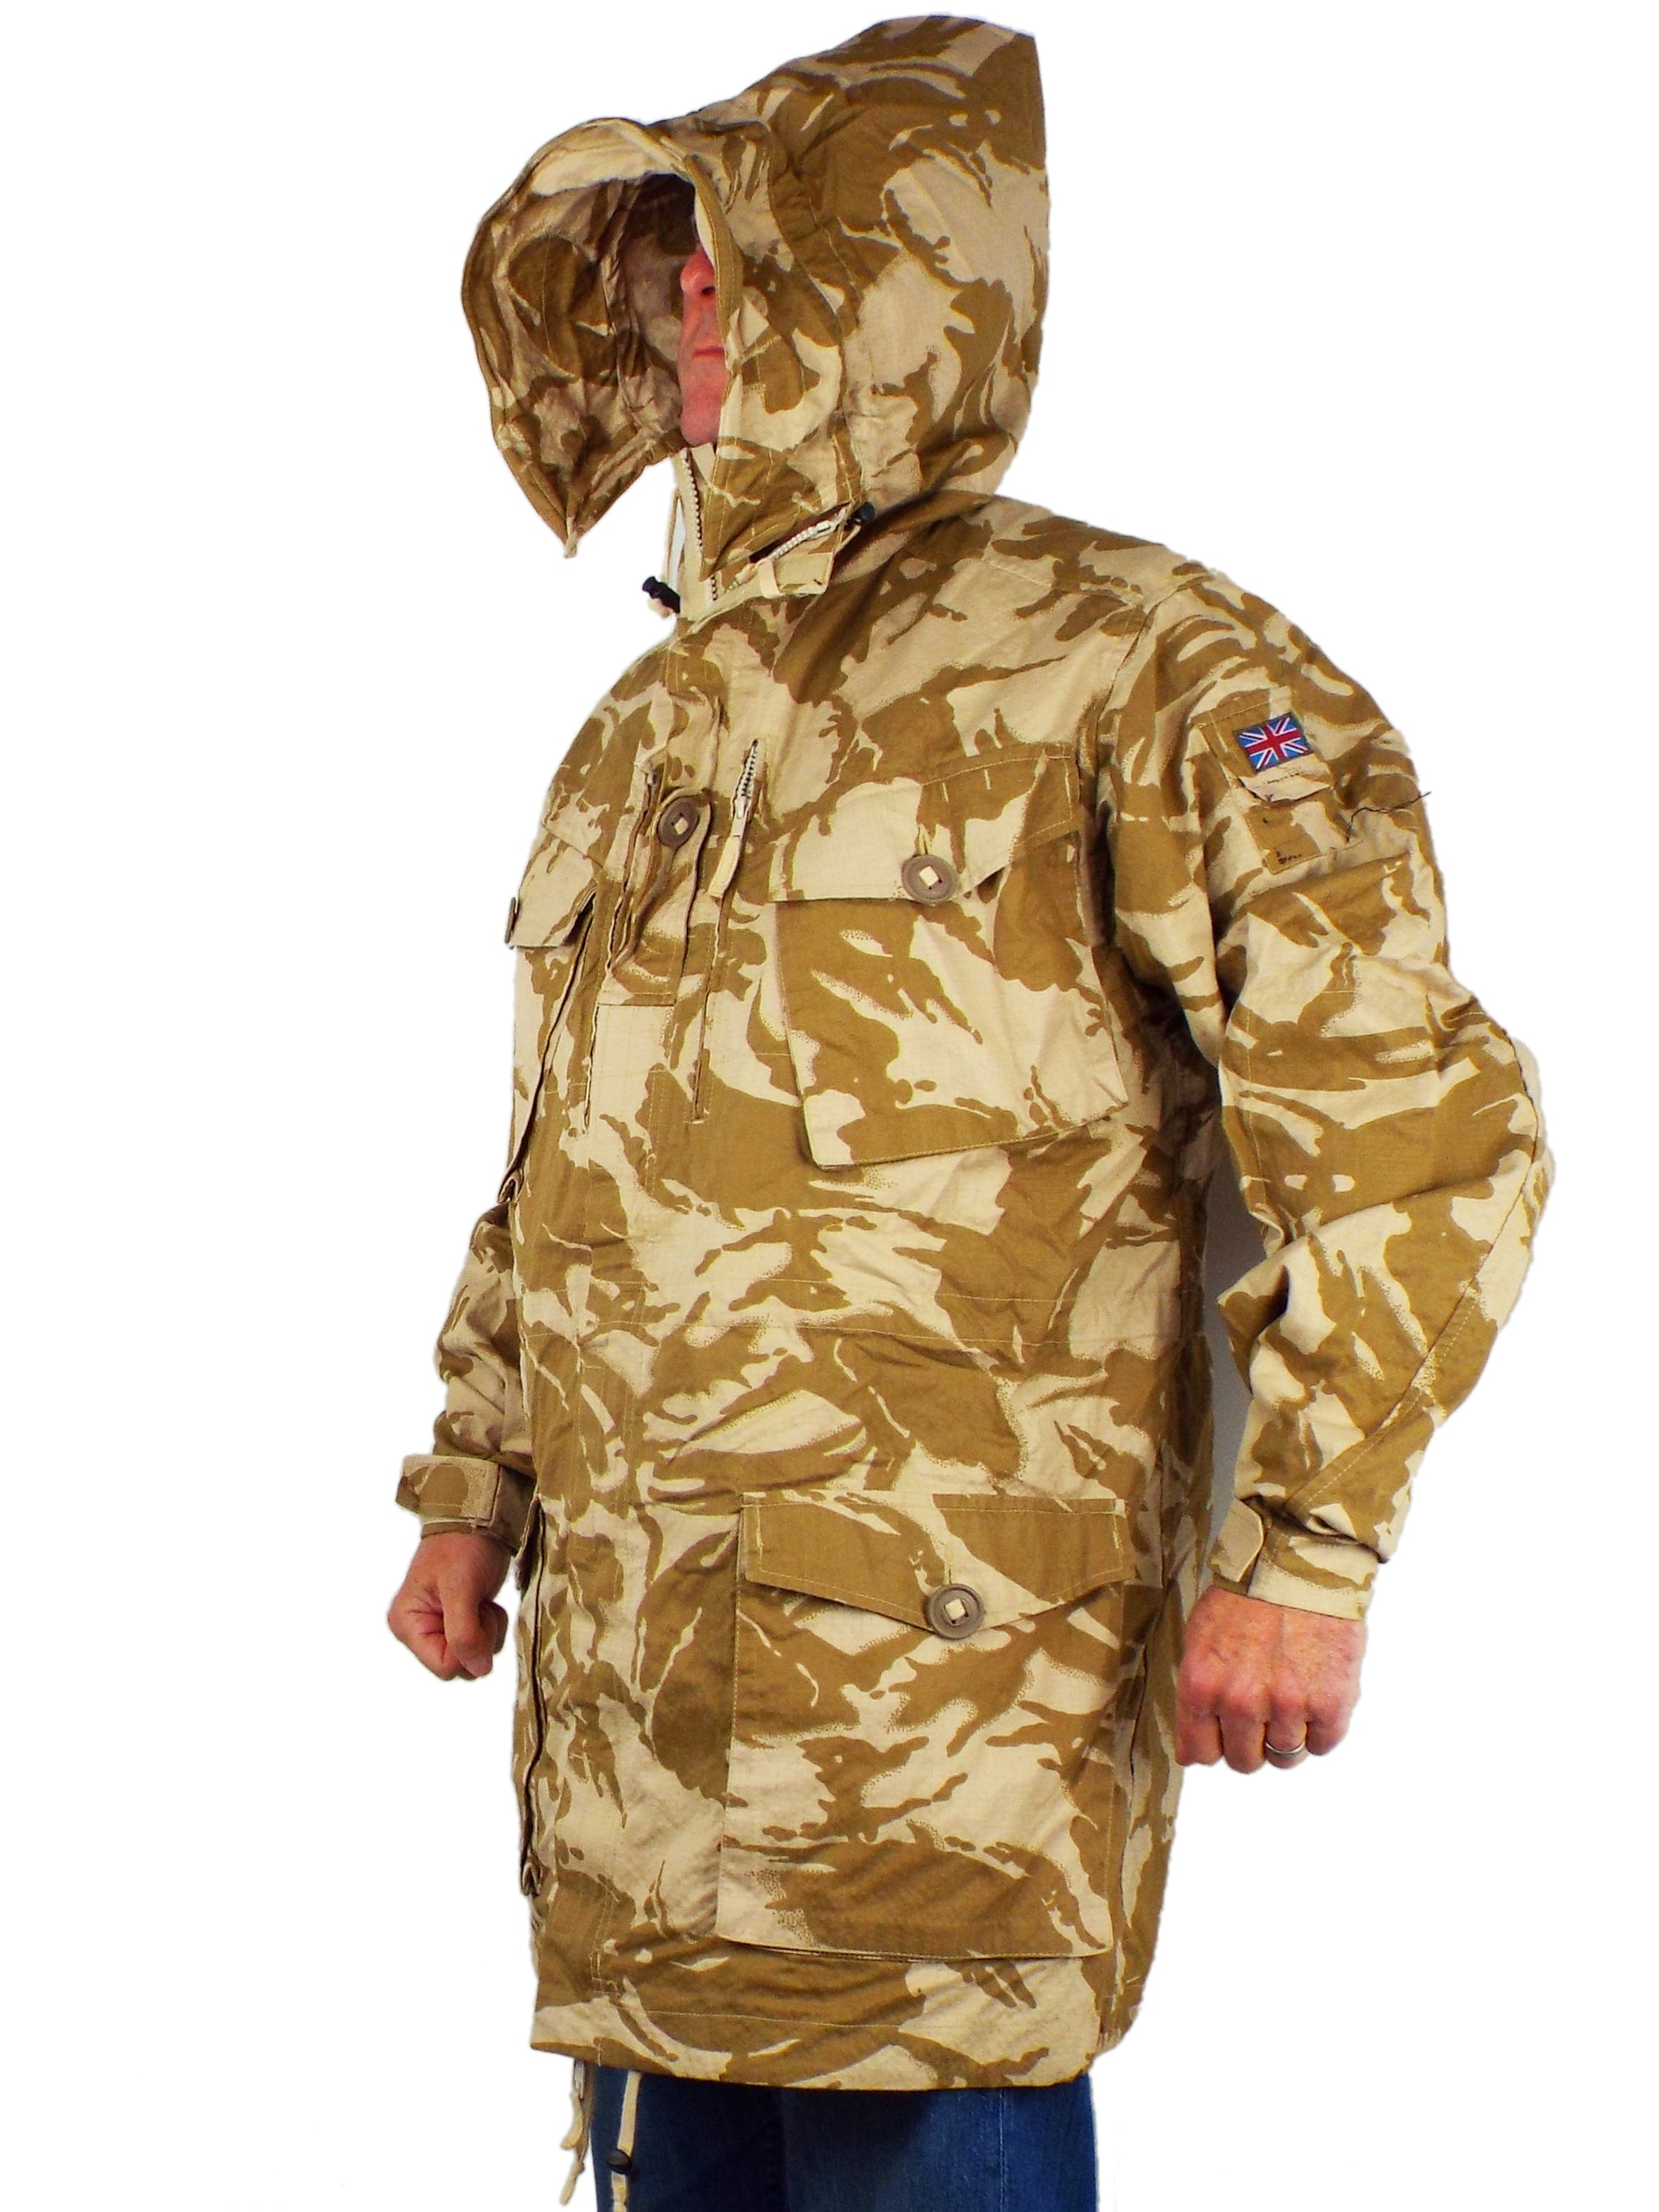 British Army Rip-Stop Windproof Desert Jacket - Grade 1 - Forces